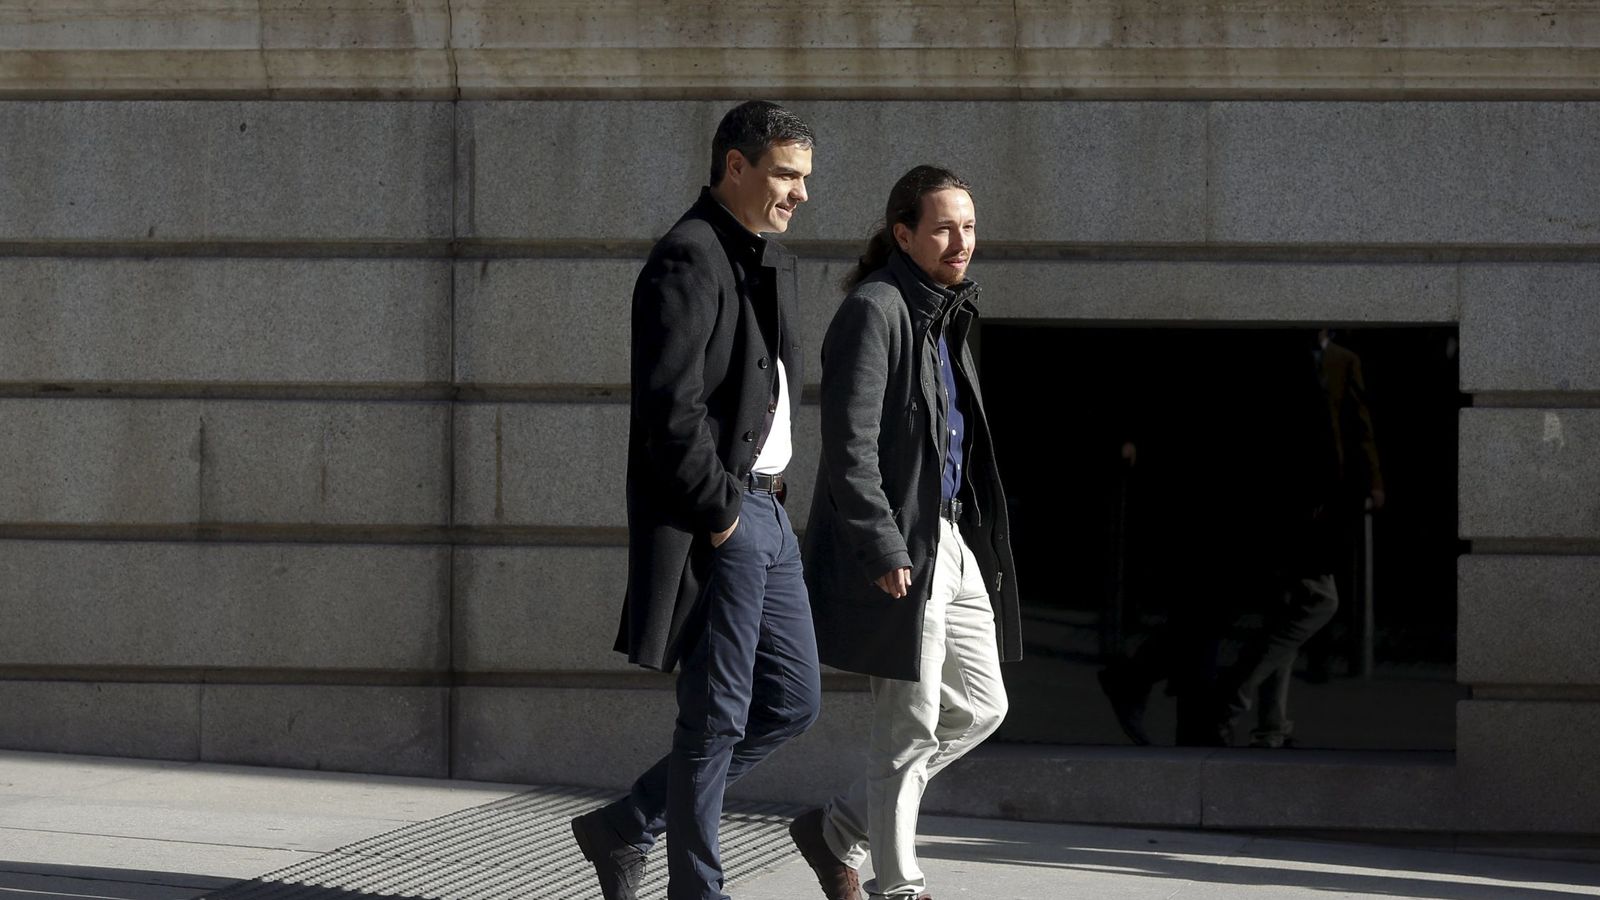 Foto: Socialist leader sanchez and podemos leader iglesias talk as they walk outside parliament before their meeting in madrid